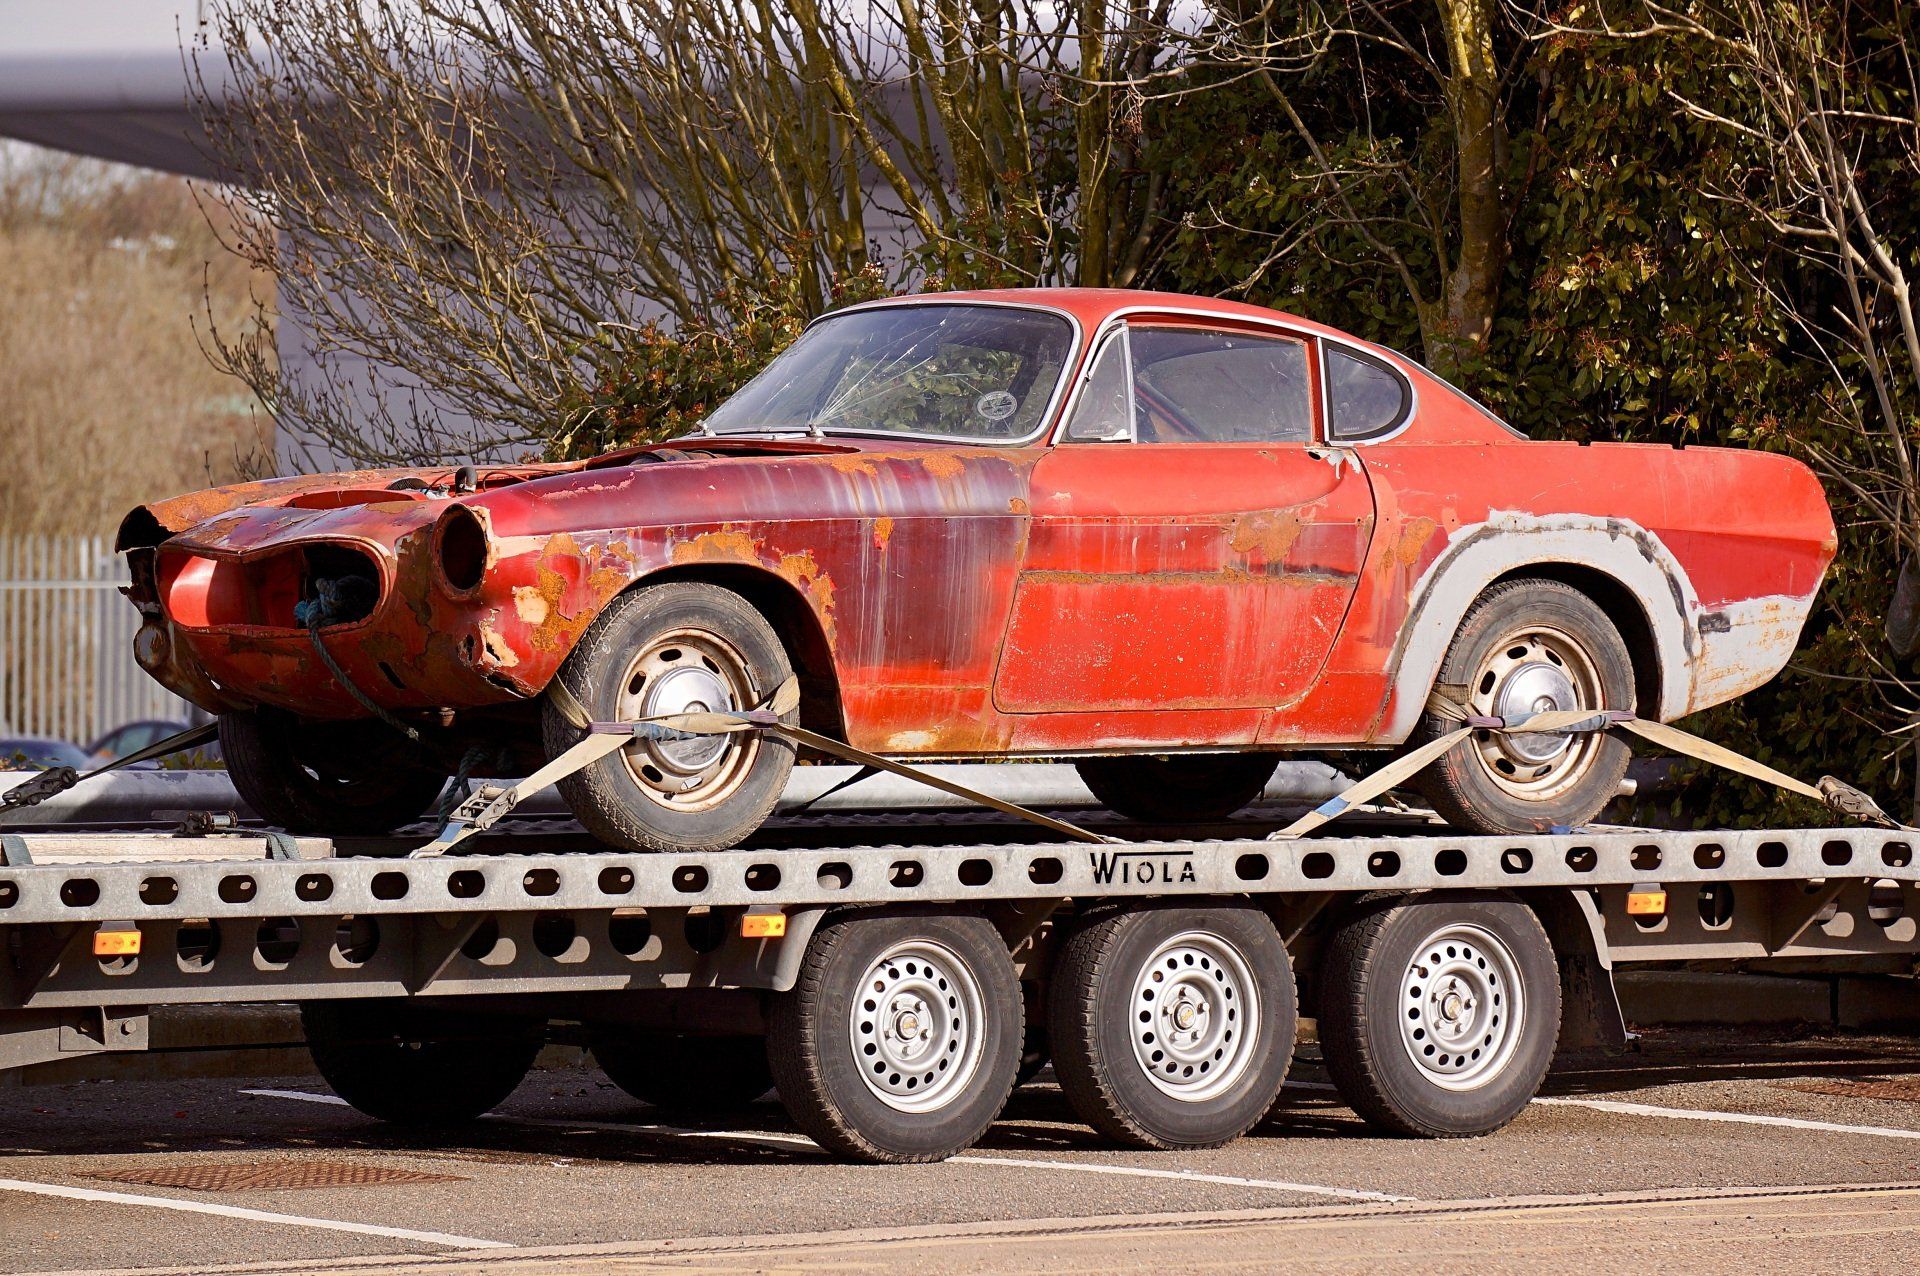 An old red sports car with paint missing, on a flat bed tow truck, with